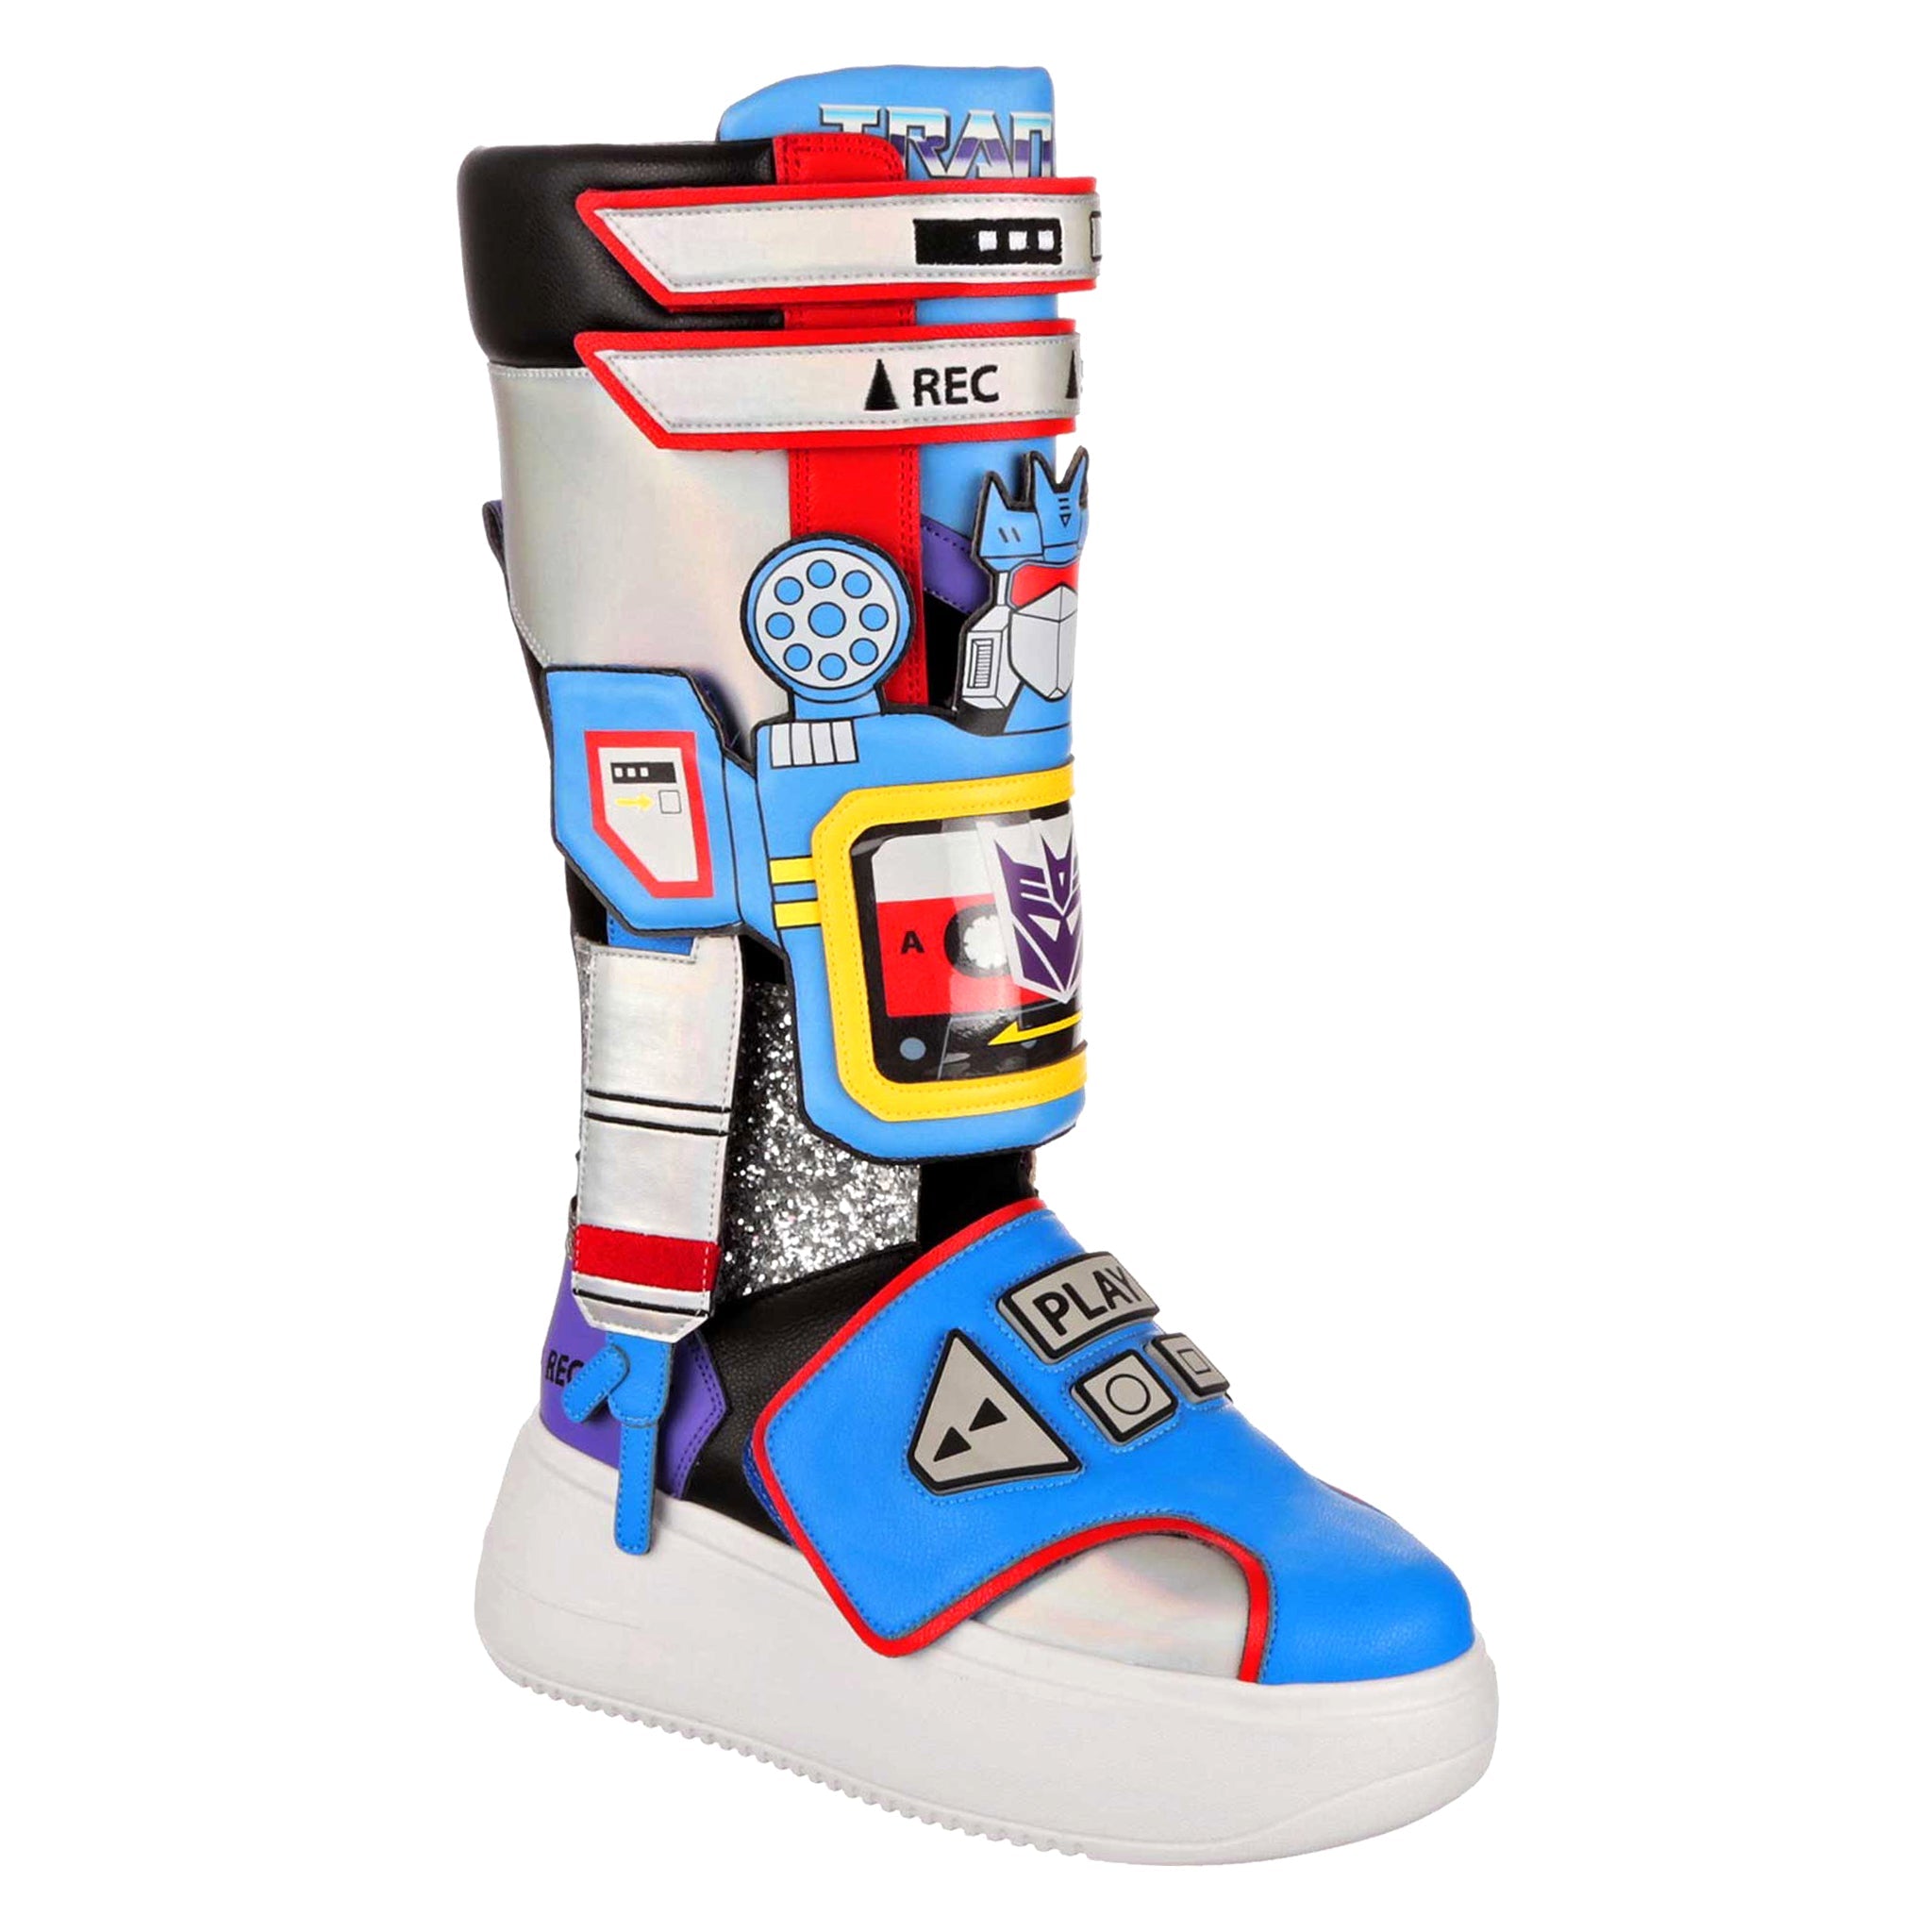 A Transformers themed Soundwave large multicoloured boot. These platform boots have a large white chunky platform with blue, silver and red details on the large knee high boot. They have retro cassette player design details over the boot with play, stop and record and a cassette deck with a purple decepticon logo on. Removable robot arms and Soundwaves face sits on the chunky boot to complete the look. 